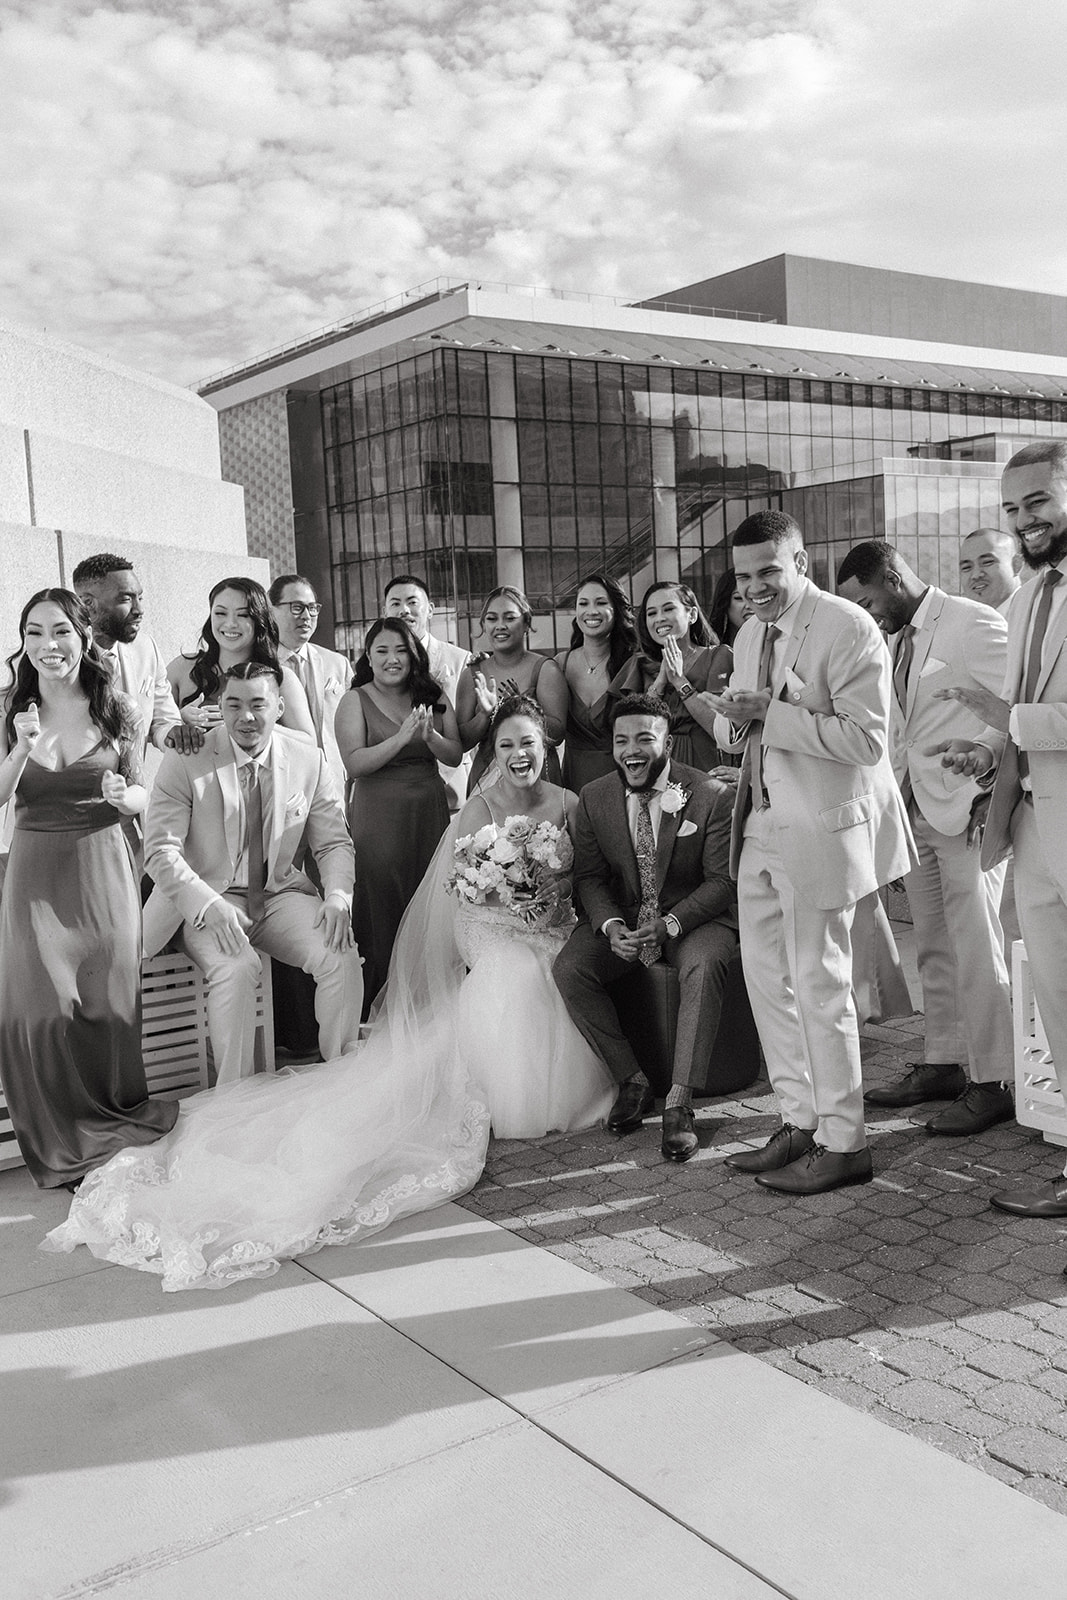 A couple who got married in Downtown San Francisco and took bridal party photos